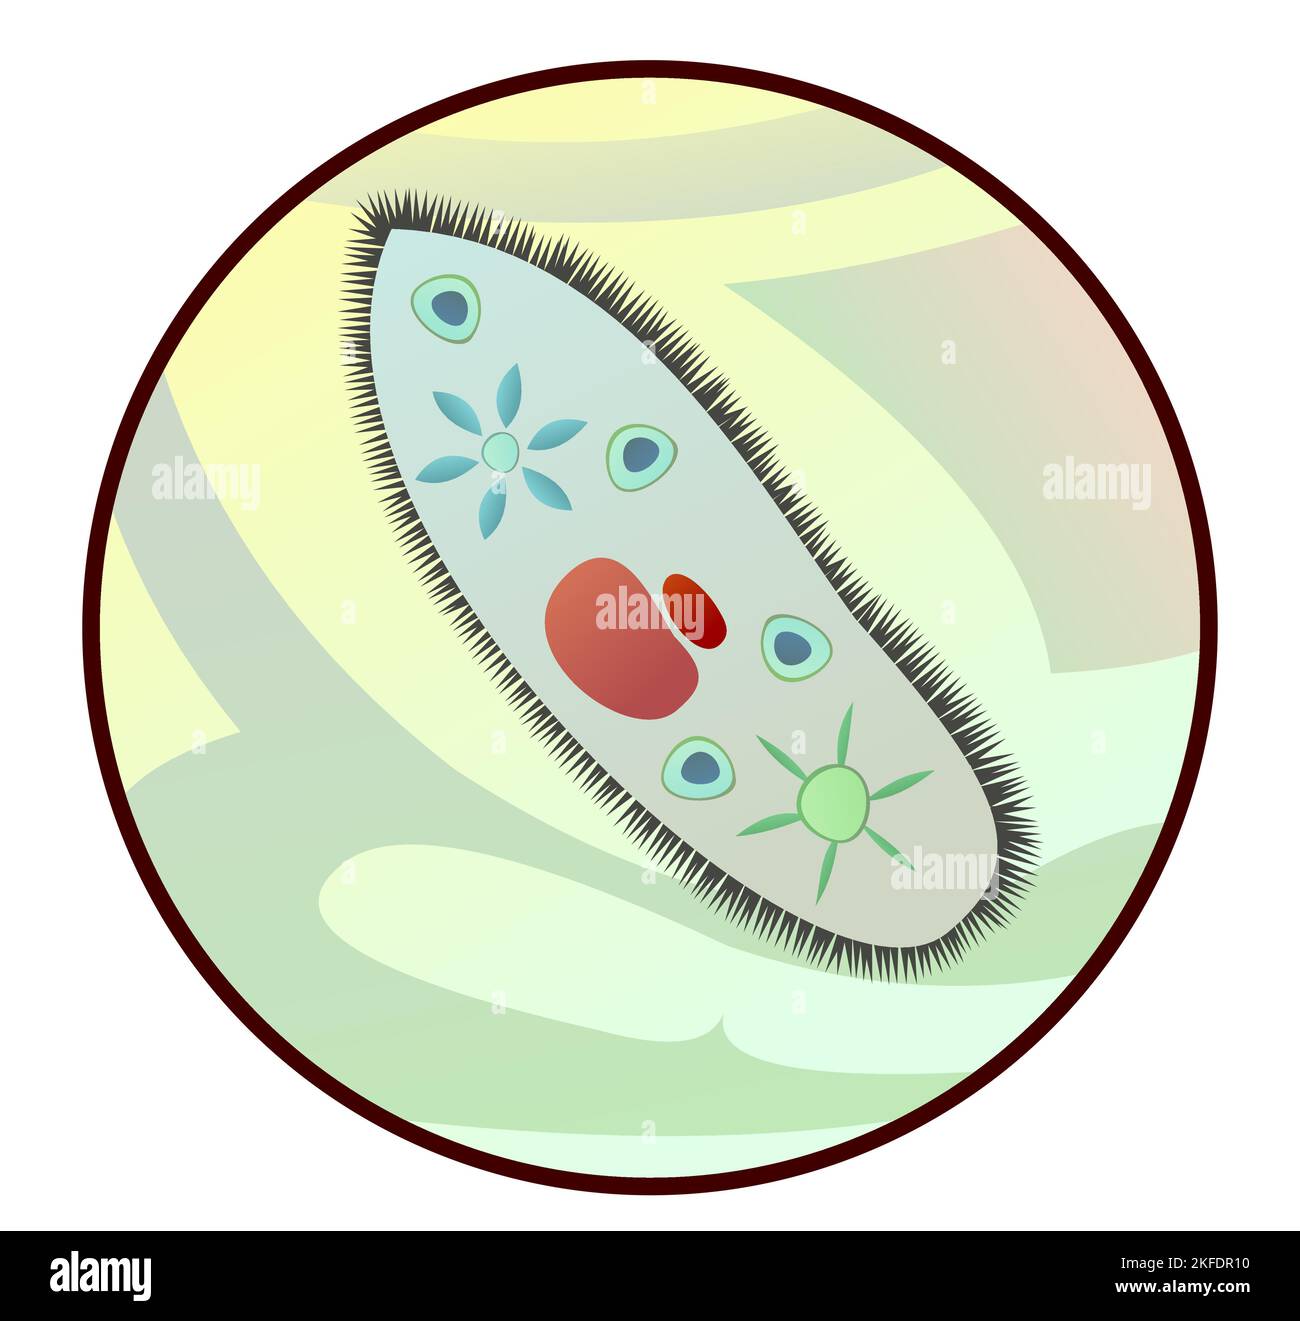 Infusoria shoe in magnification through microscope. Biology unicellular. Science items picture. Study of living cells of plants, animals and humans. I Stock Vector